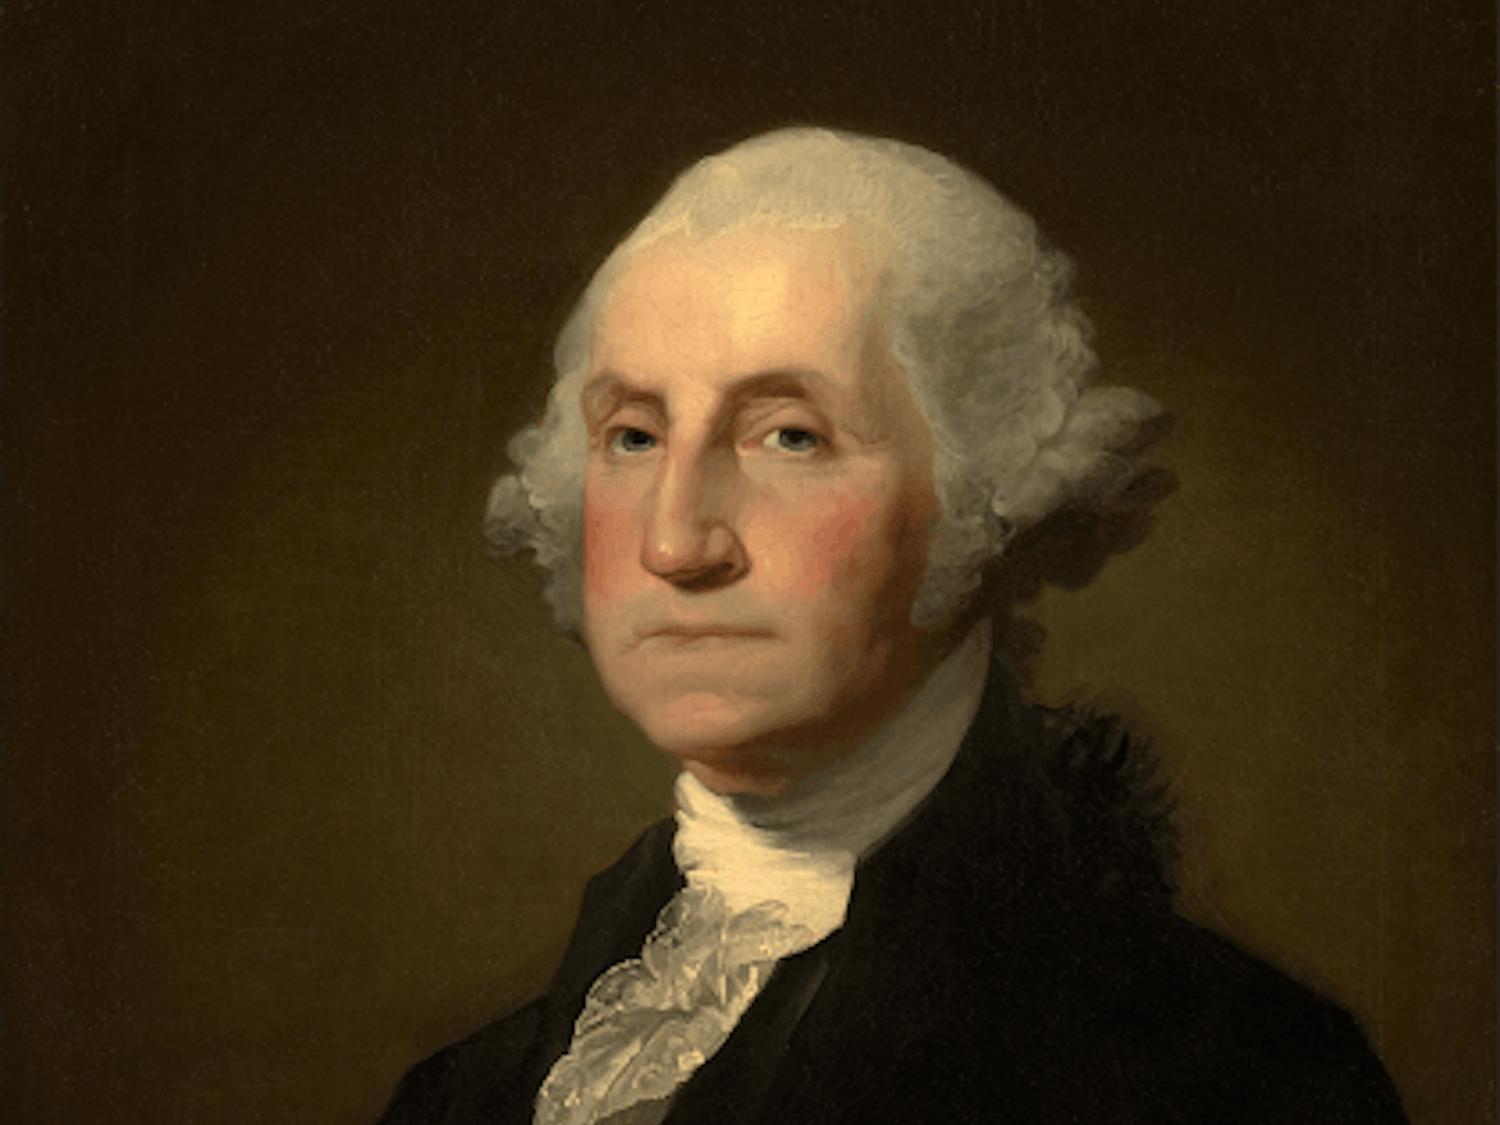 George Washington&#x27;s influential leadership in the 1700s has had a significant impact on the modern United States, allowing the nation to celebrate his legacy on President&#x27;s Day (Photo courtesy of Wikimedia Commons / “Gilbert Stuart Williamstown Portrait of George Washington” by Gilbert Stuart).